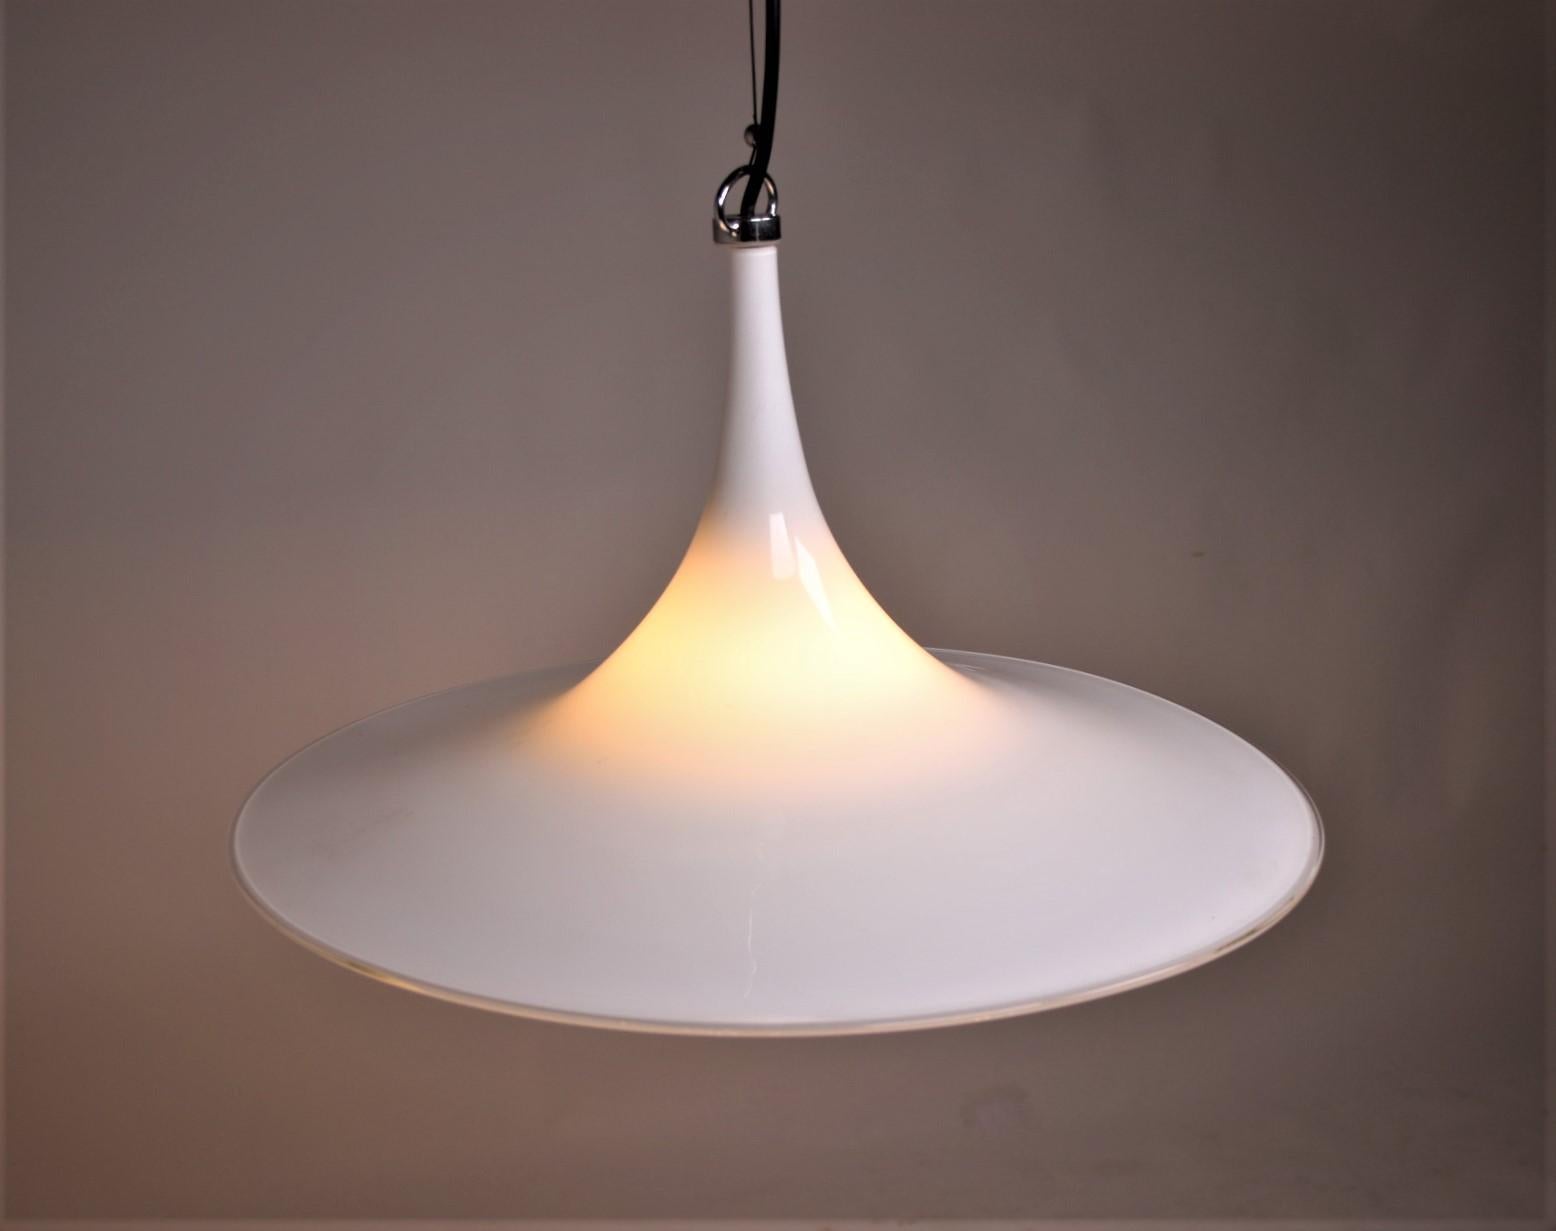 Murano glass white hanging lamp with a chic shape.

sleek and stylish. high-quality materials so that the item will last for years.

the edge of this lamp has a translucent effect, which makes the model even more unique.

originally from the